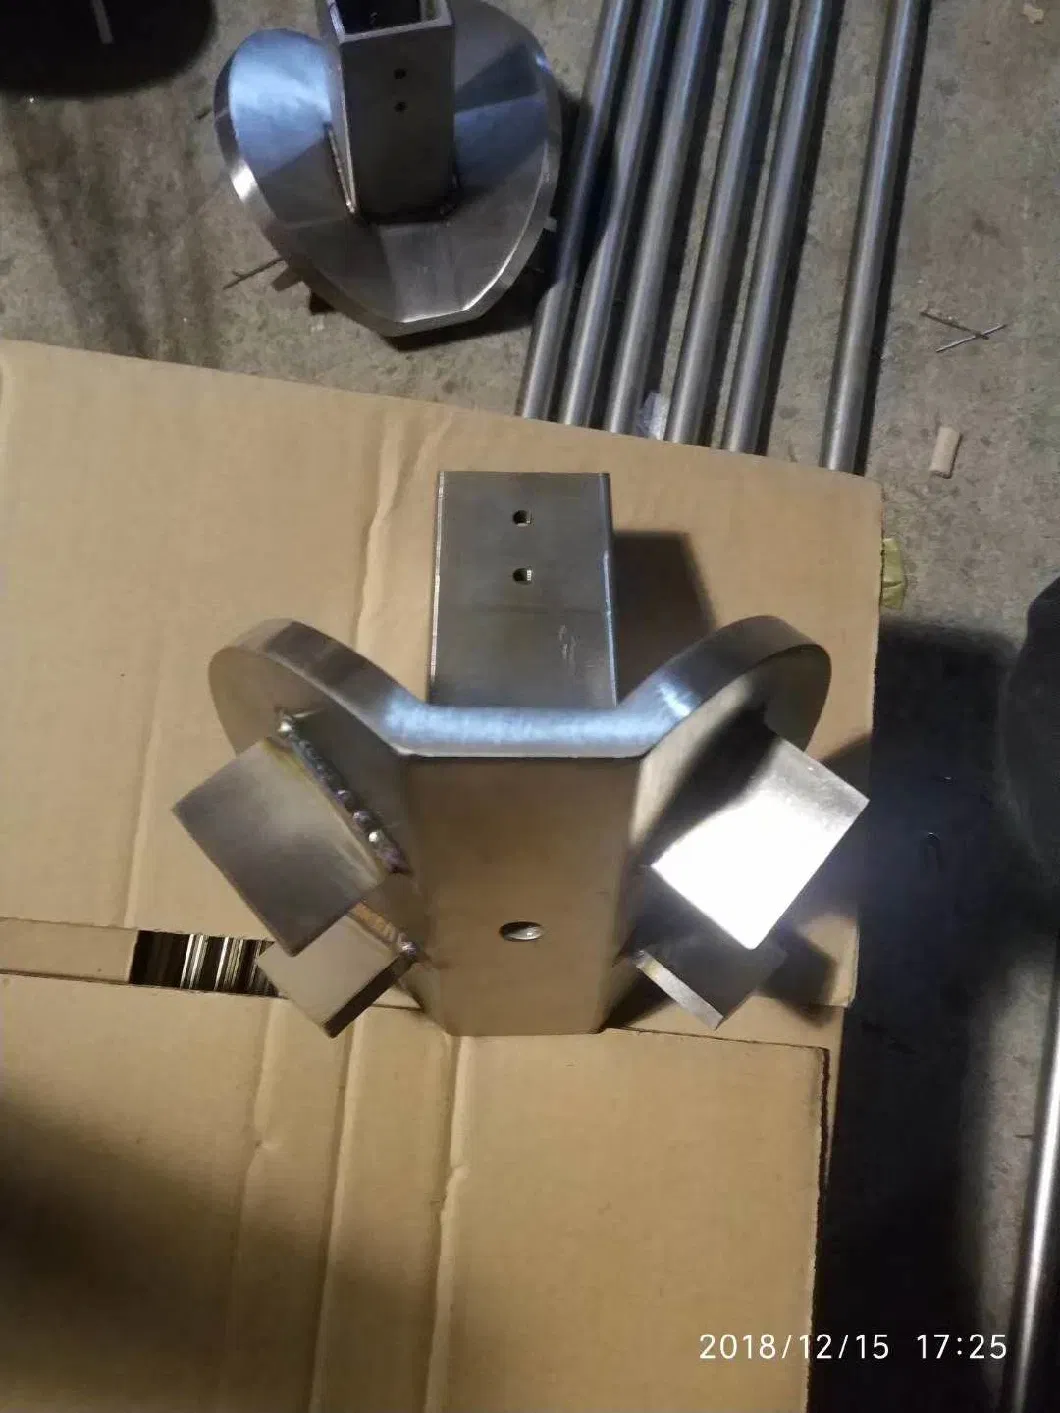 Stainless Steel Stone Cladding Anchor